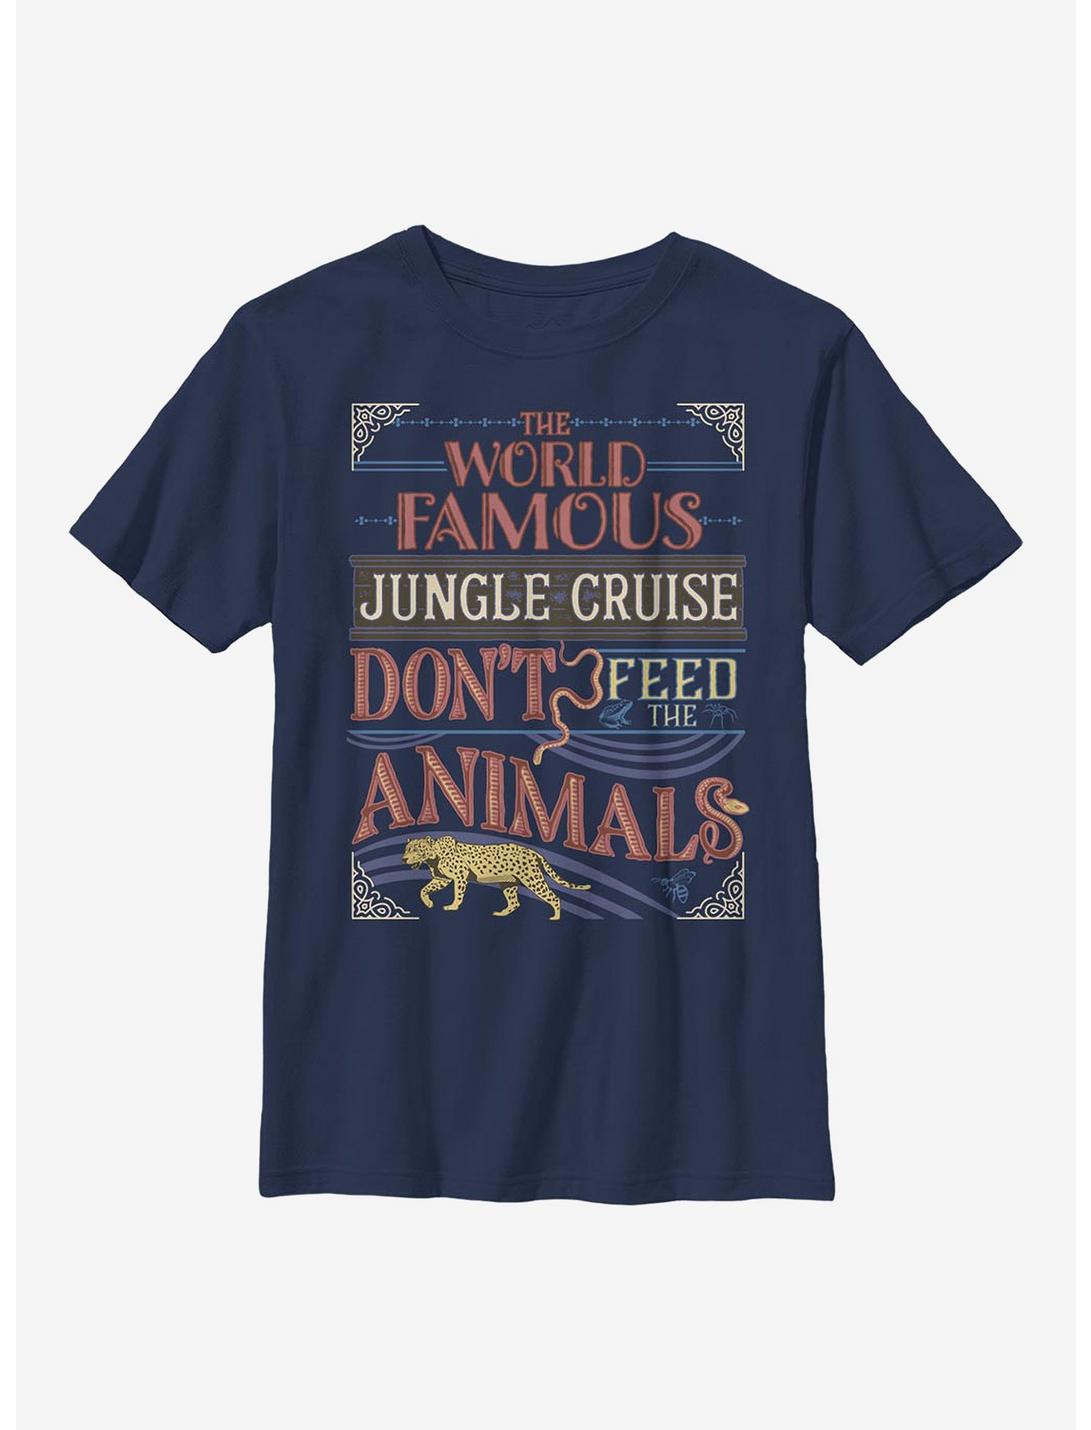 Disney Jungle Cruise The World Famous Jungle Cruise Don't Feed The Animals Youth T-Shirt, NAVY, hi-res